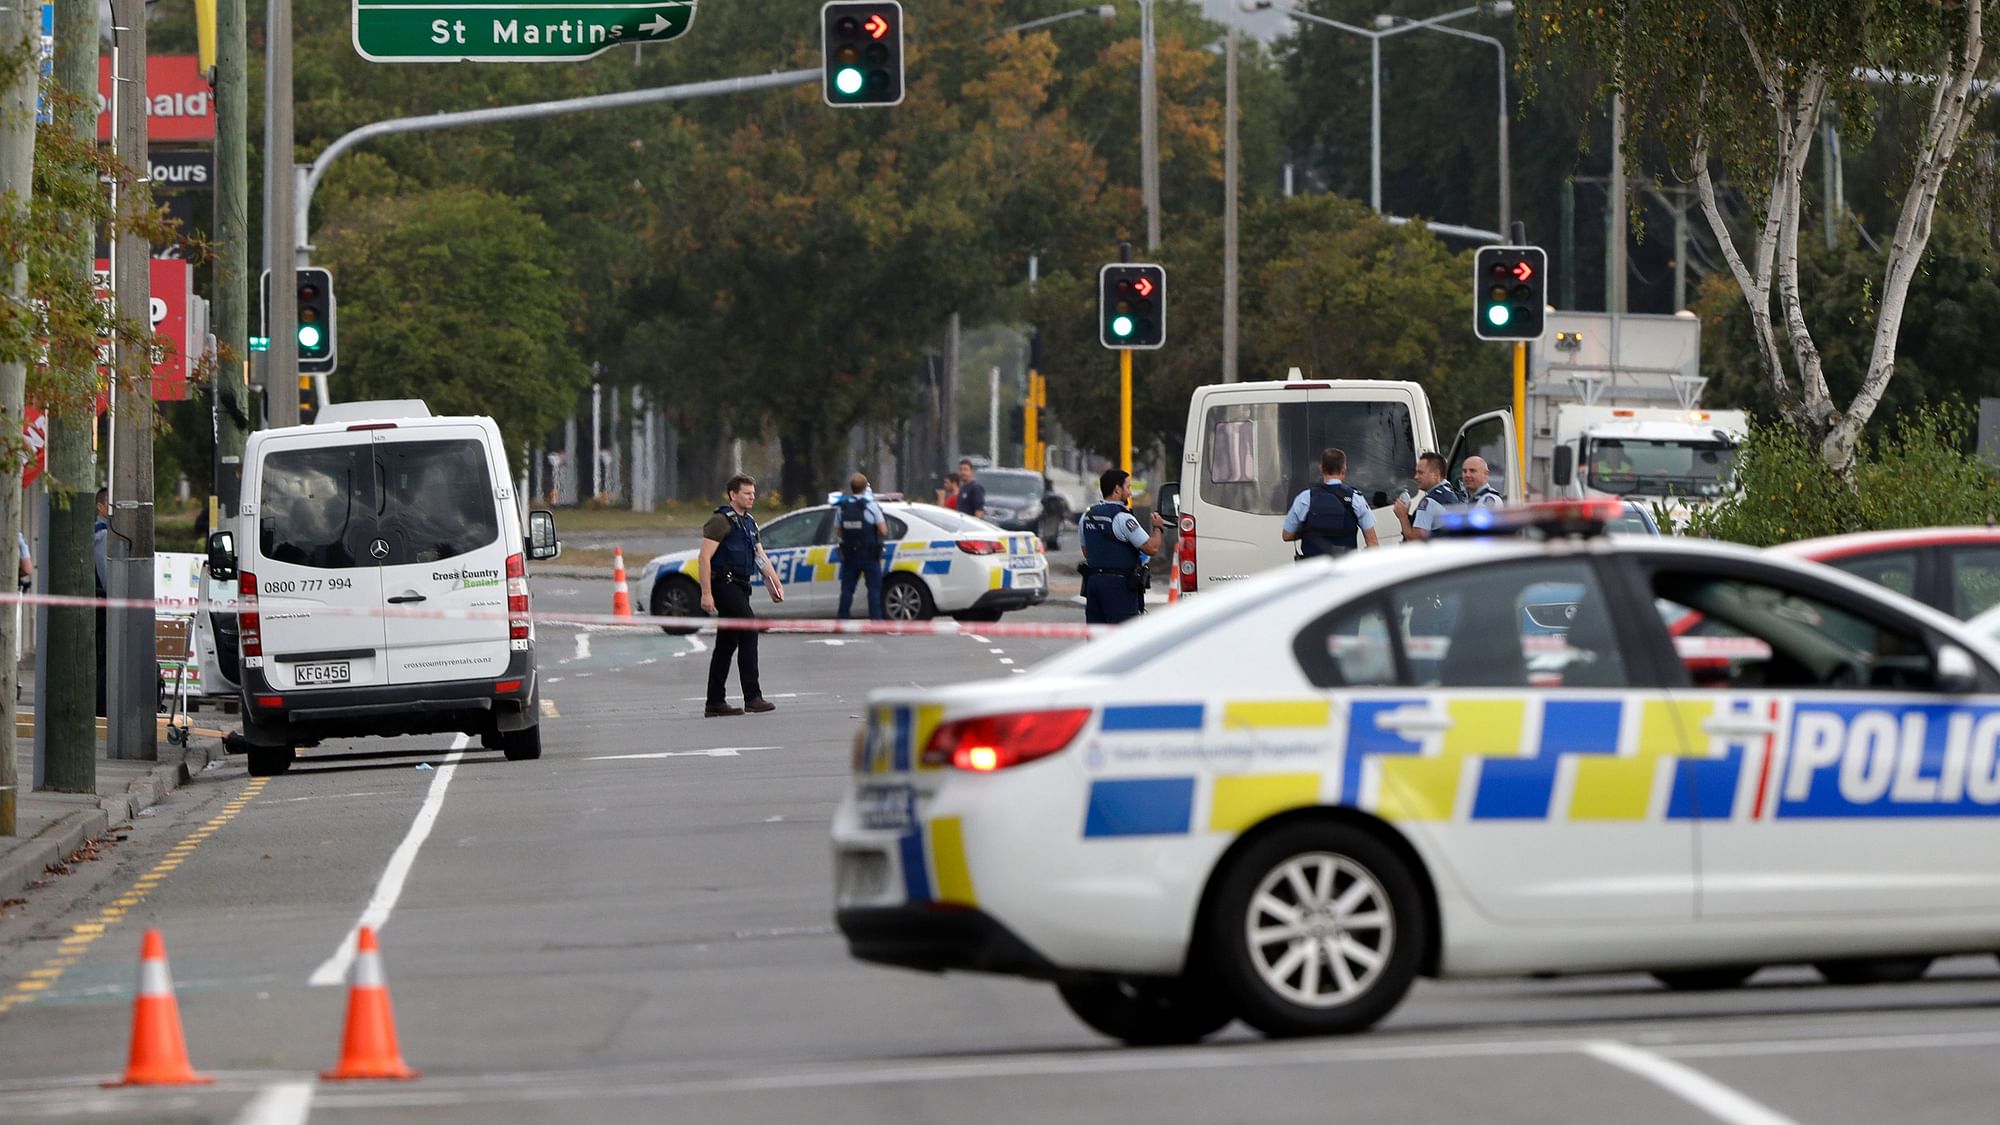 50 people were killed in a terror attack on two mosques in New Zealand’s Christchurch on 15 March.&nbsp;